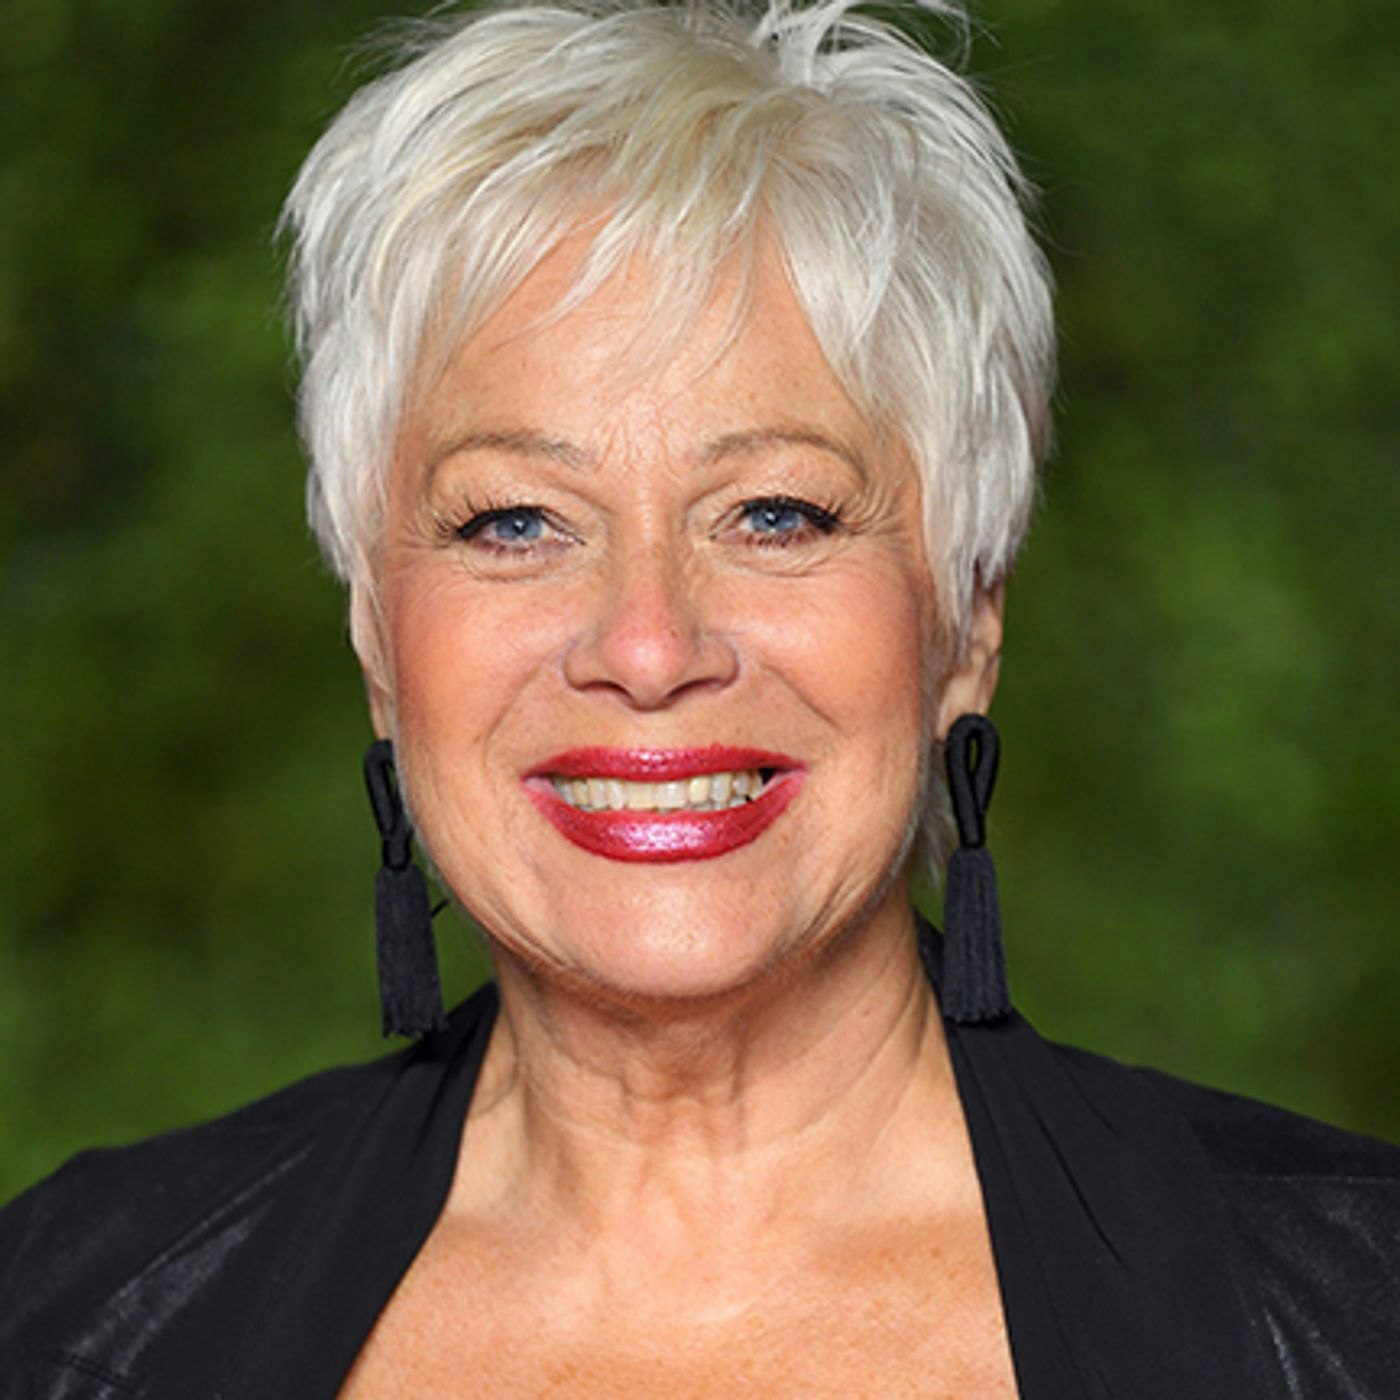 Denise Welch talks about life with her ’unwelcome visitor’